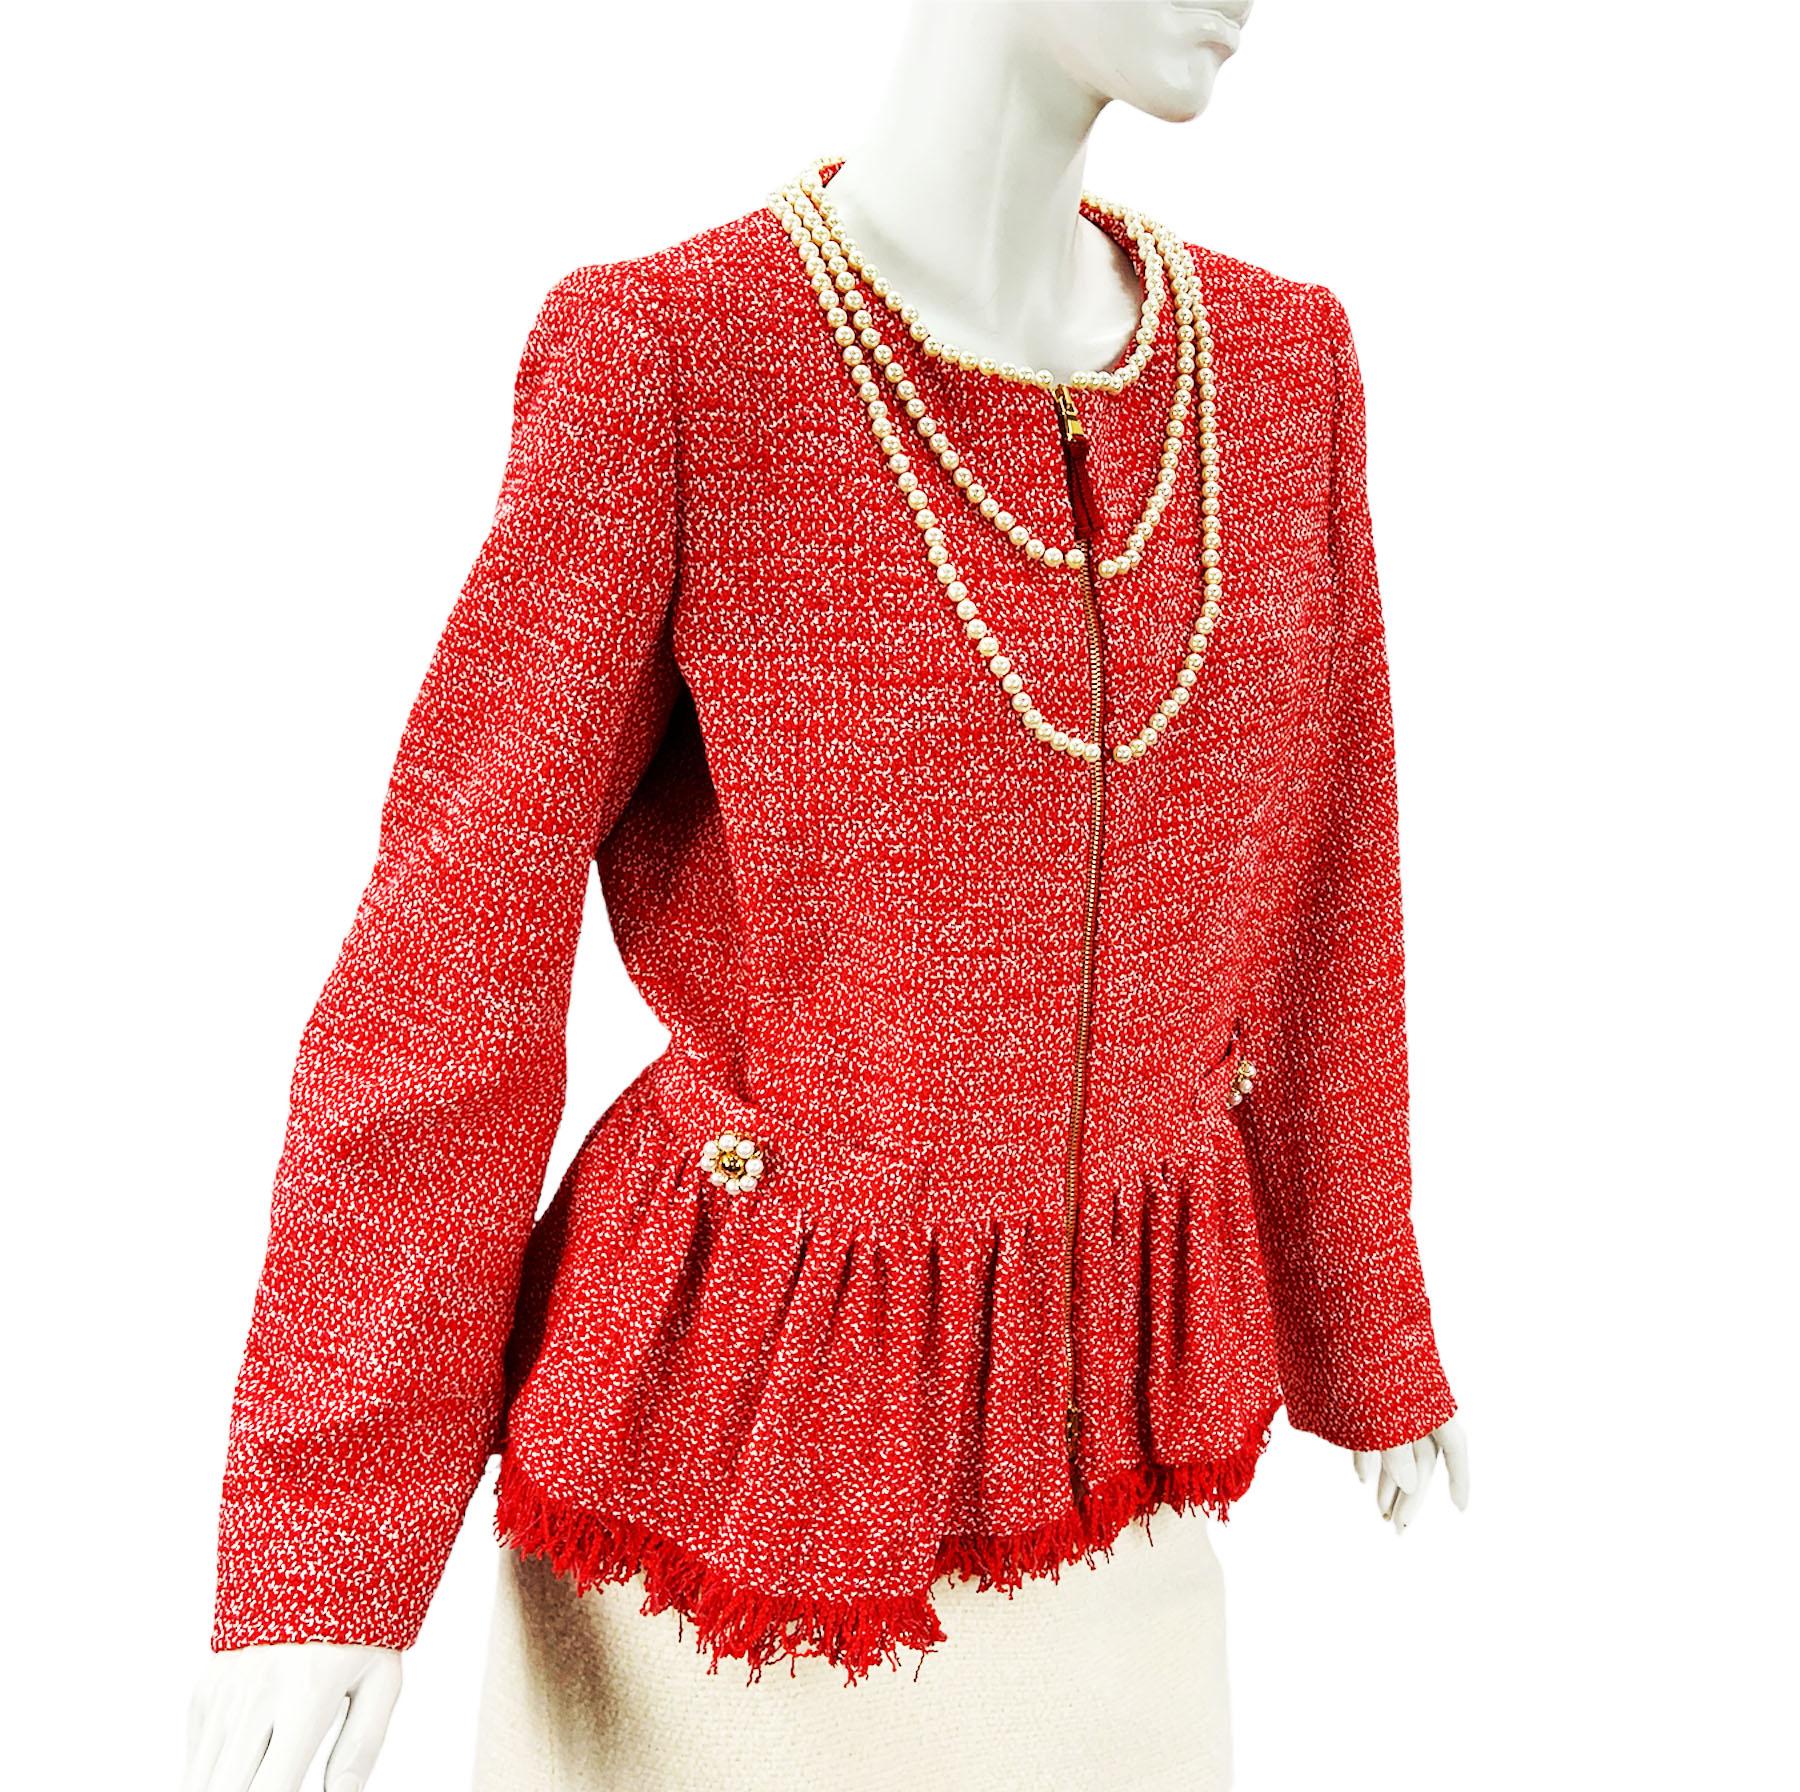 Moschino Pearl-like Necklace Embellished Boucle Jacket
Italian size 46 / US 12
Red boucle mid-weight jacket finished with the attached, pearl-like beads, triple necklace.
Two pockets adorned with decorative buttons and snaps for closure. 
Peplum